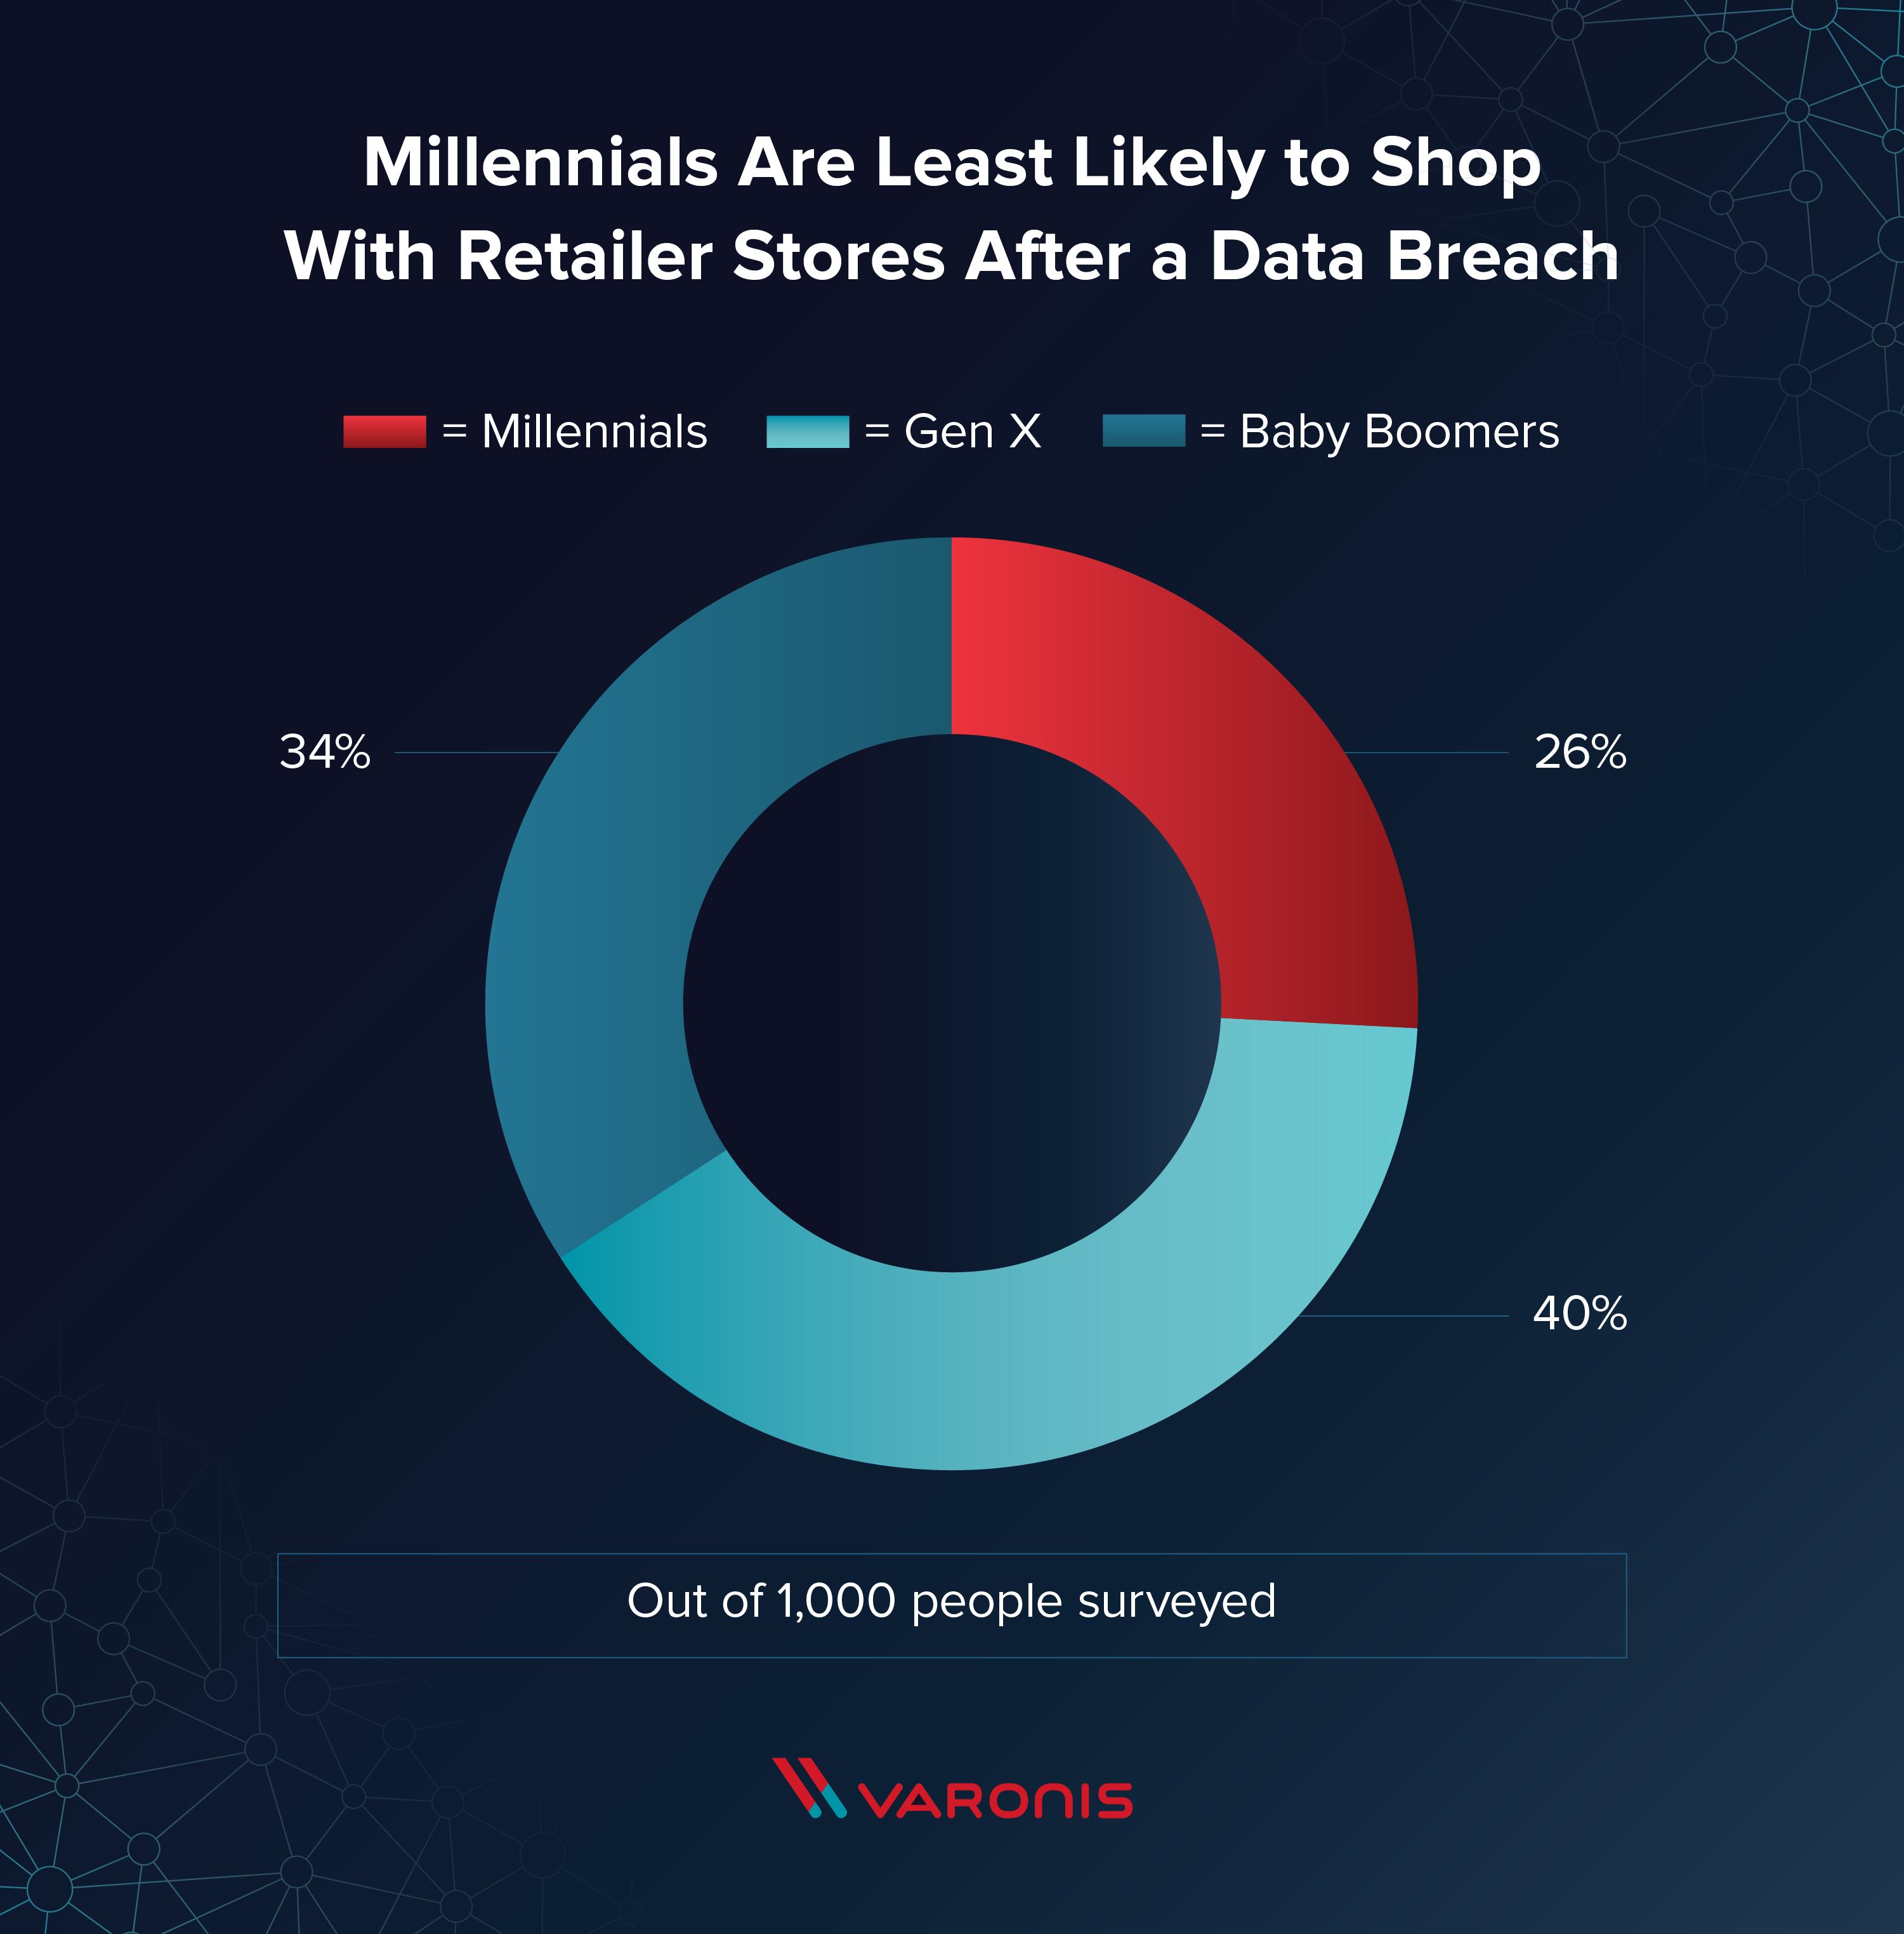 https://info.varonis.com/hubfs/Imported_Blog_Media/millennials-least-likely-to-shop-with-retailer-after-data-breach@2x.png?hsLang=en